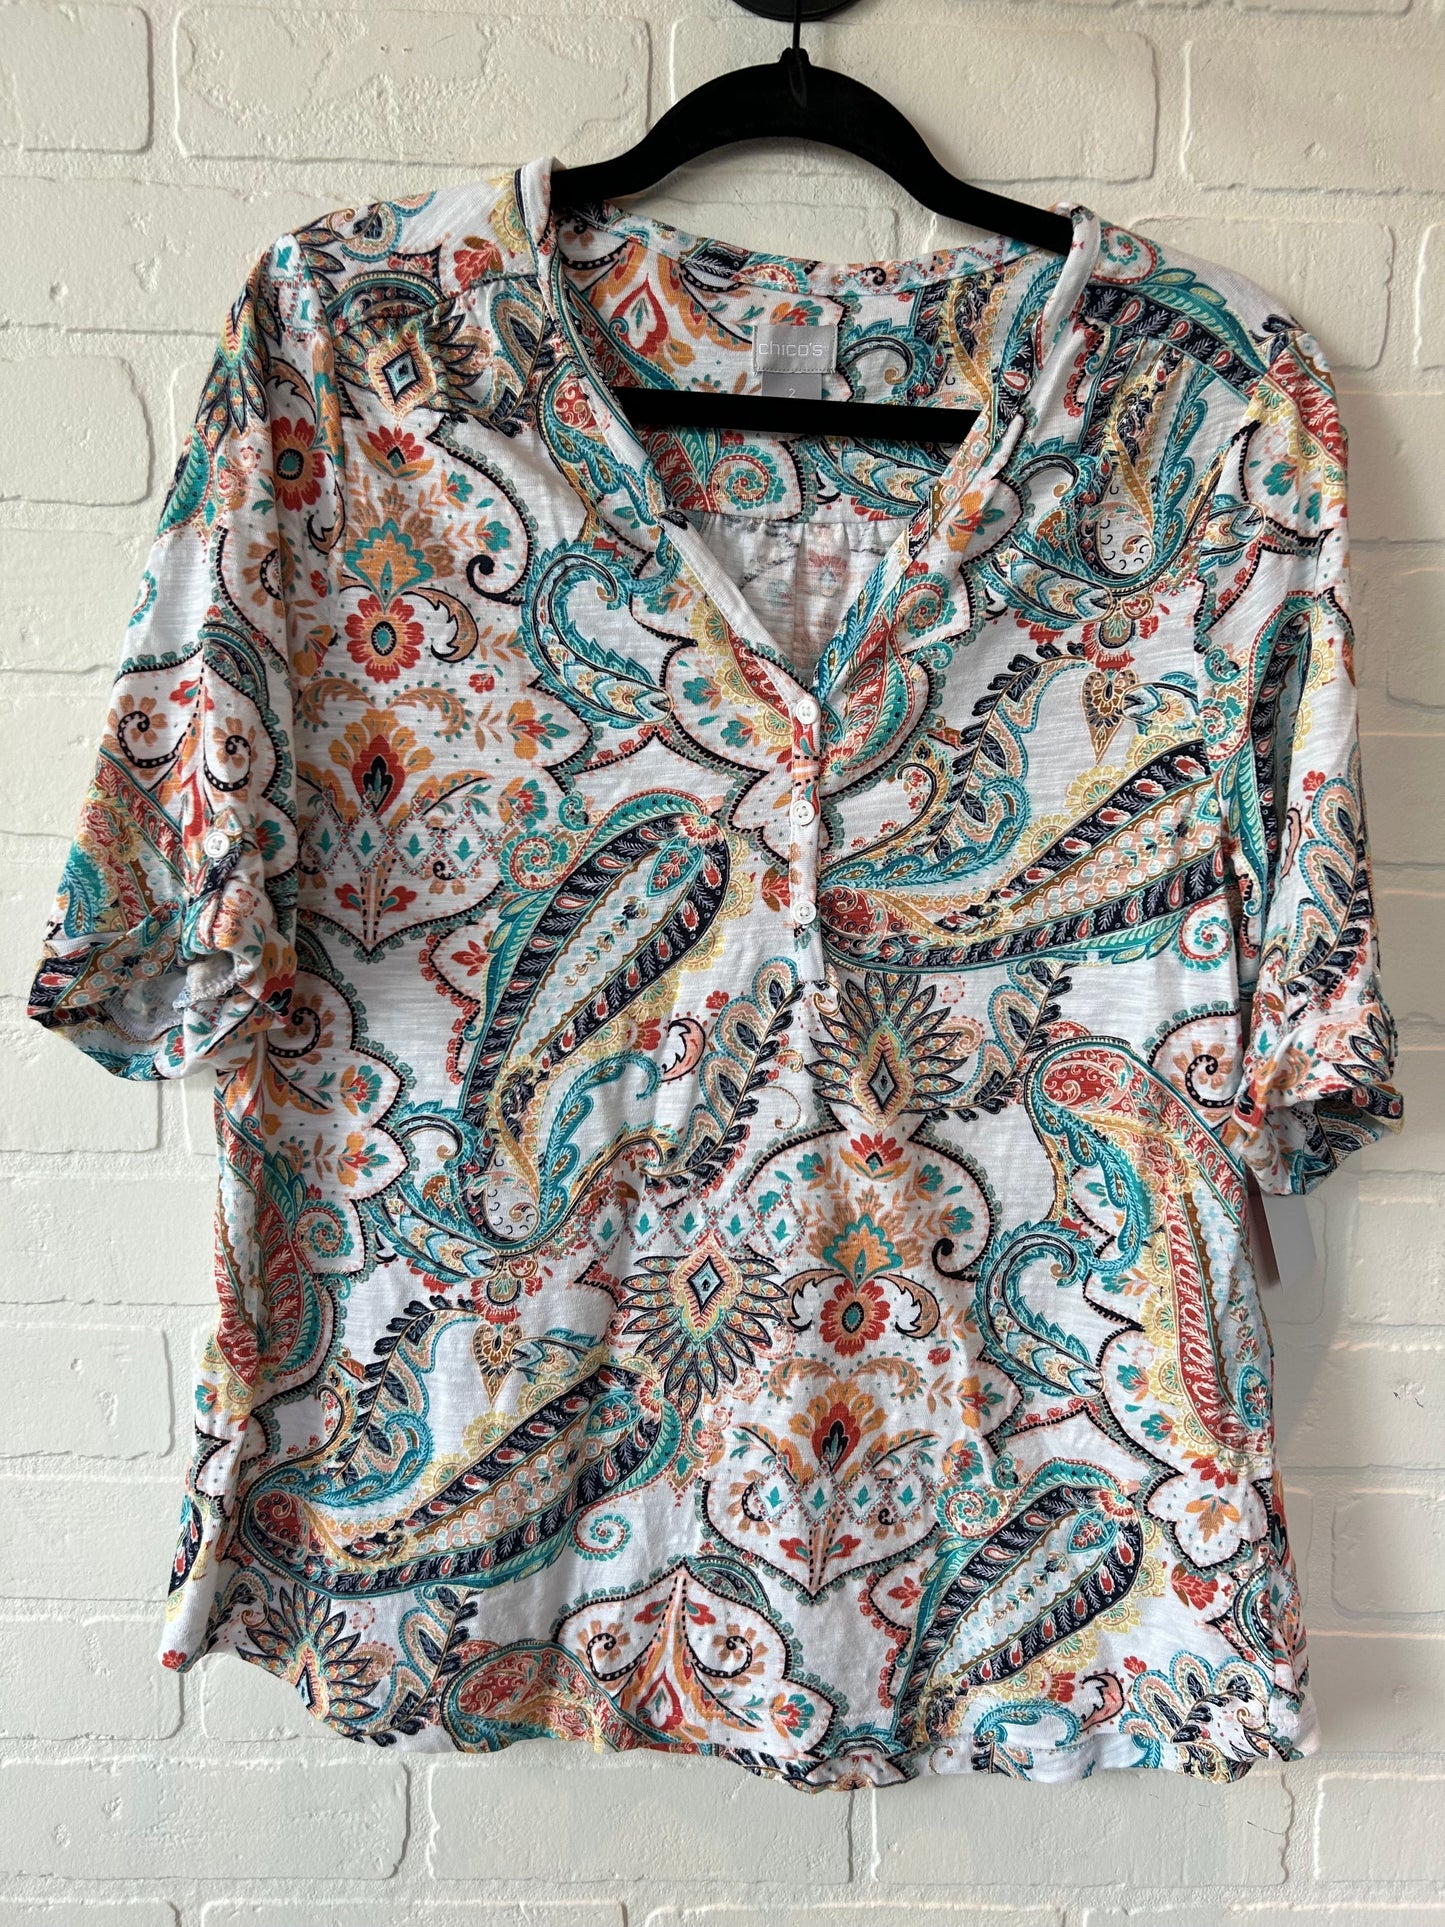 Multi-colored Top Short Sleeve Chicos, Size L